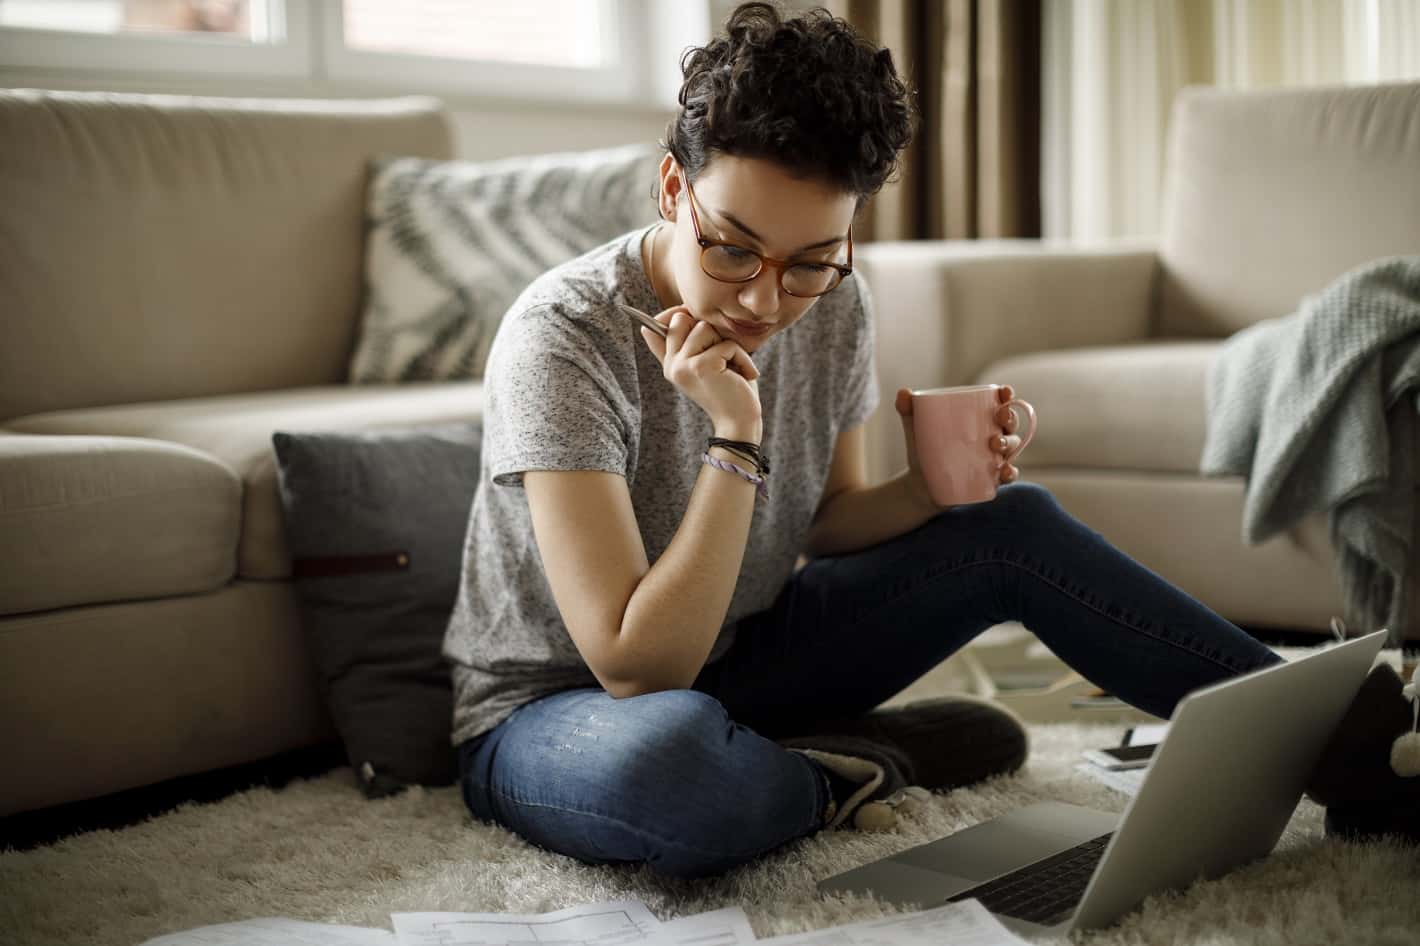 A woman holds a mug of coffee while exploring Xfinity Service Bundles on her laptop